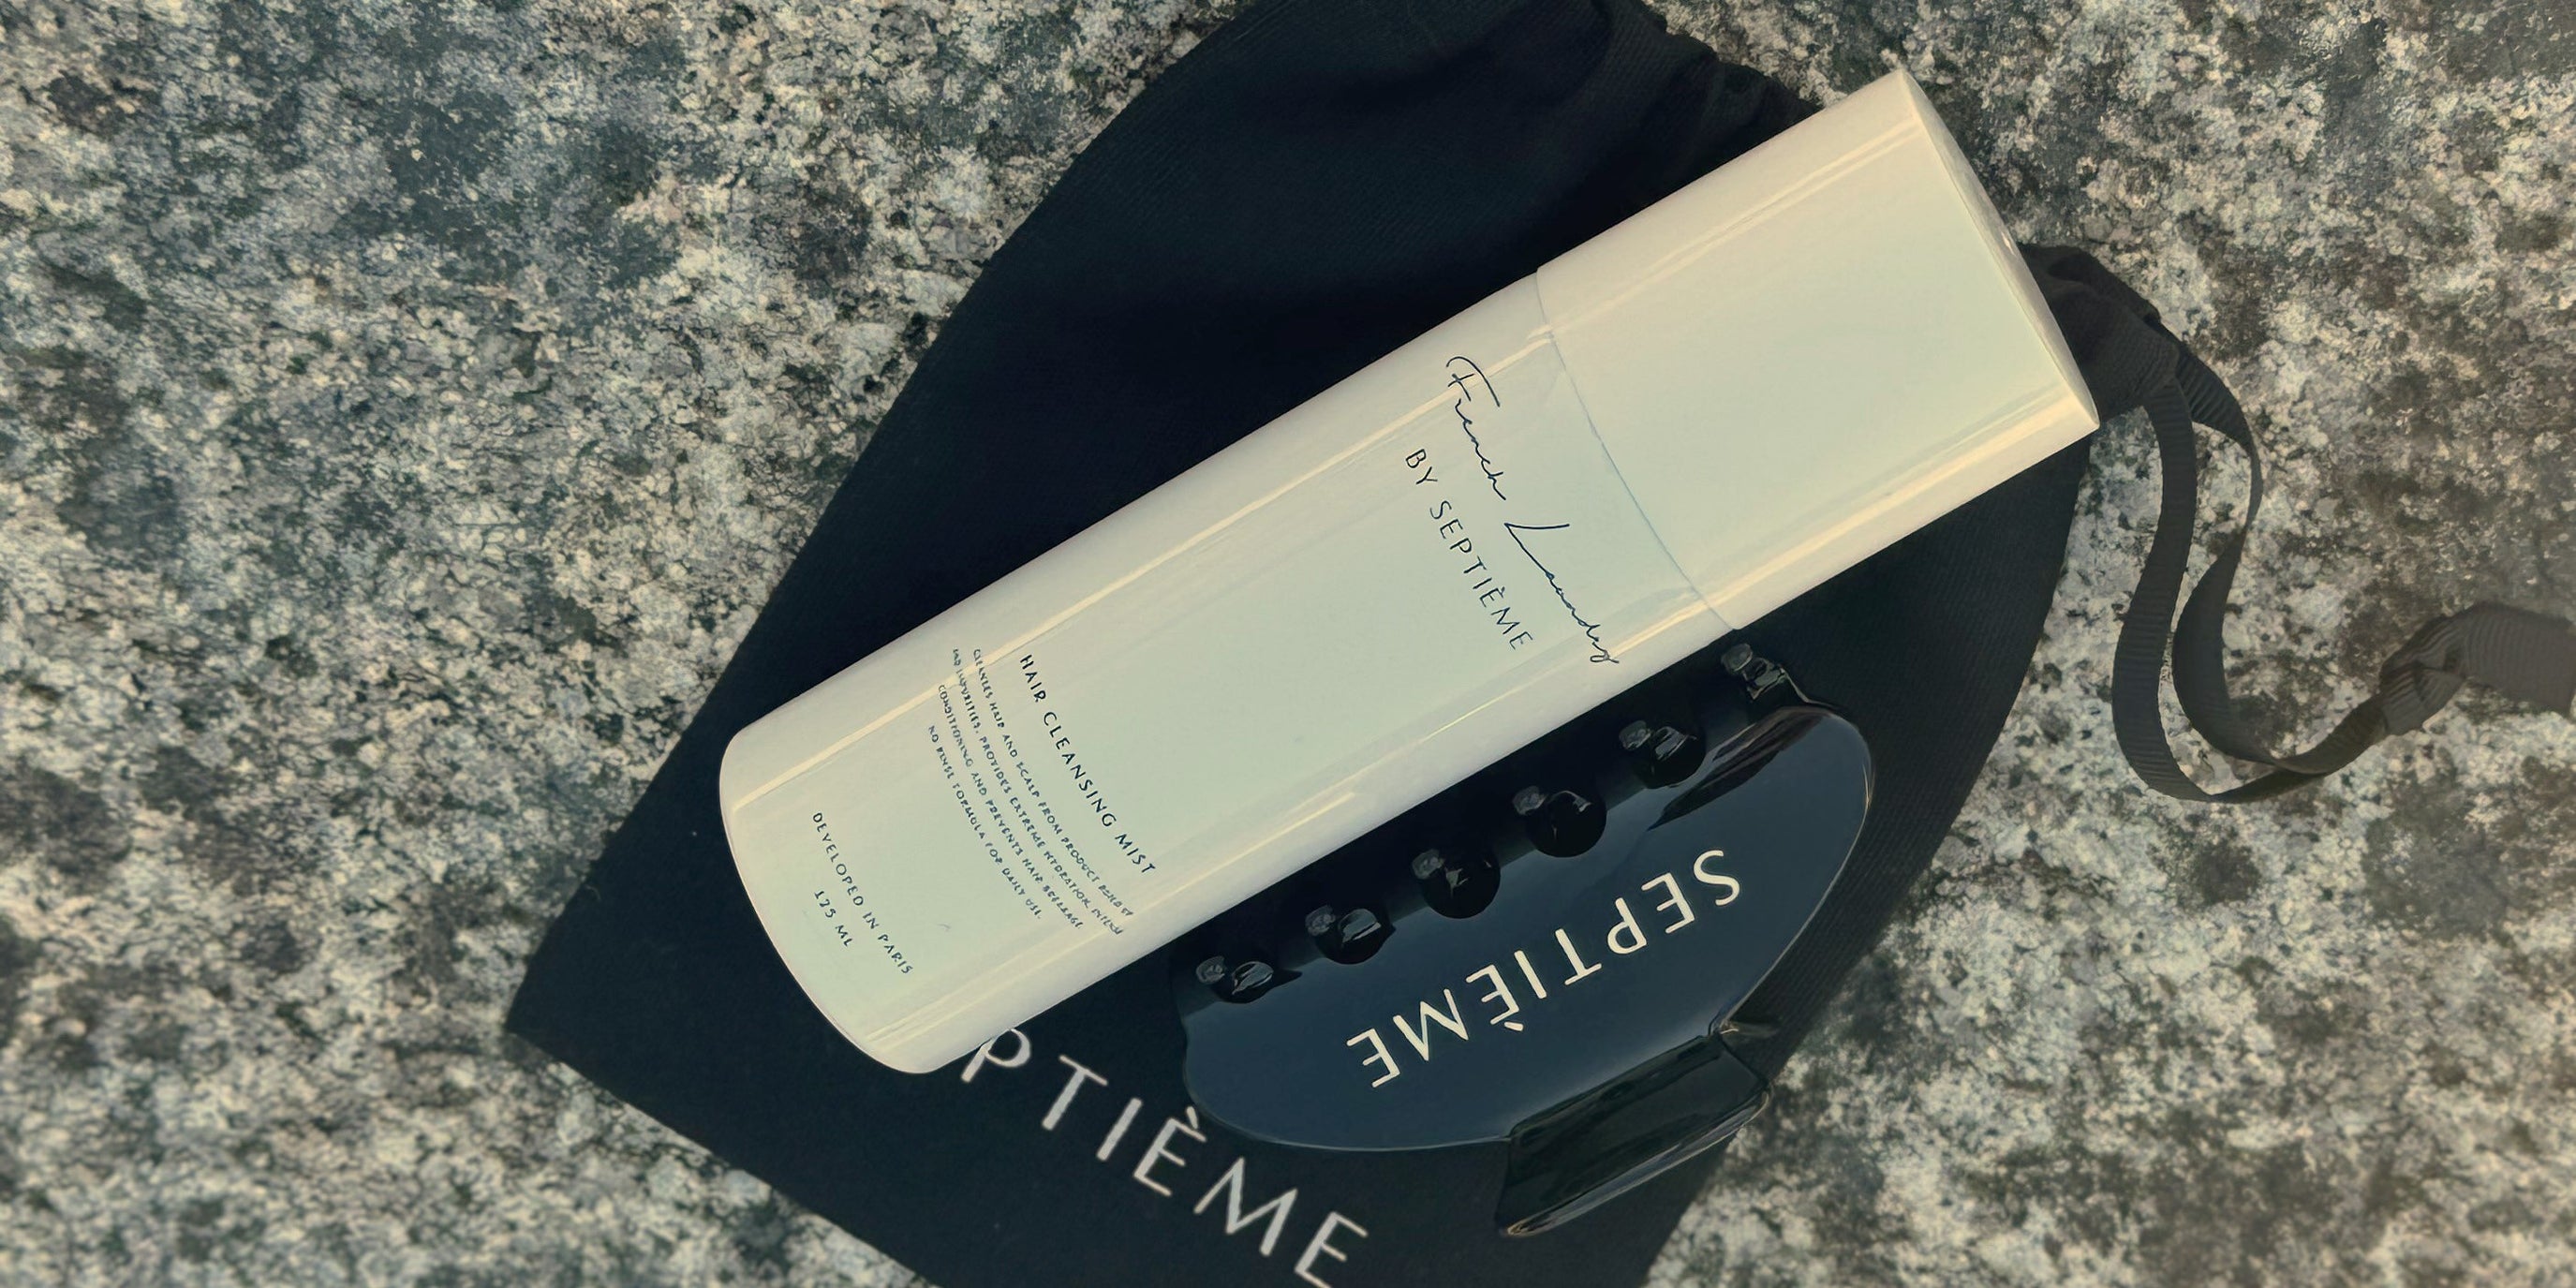 The SEPTIÈME Summer Kit contains a bottle of the best selling French Laundry Hair Cleansing Mist and the popular signature hair clip